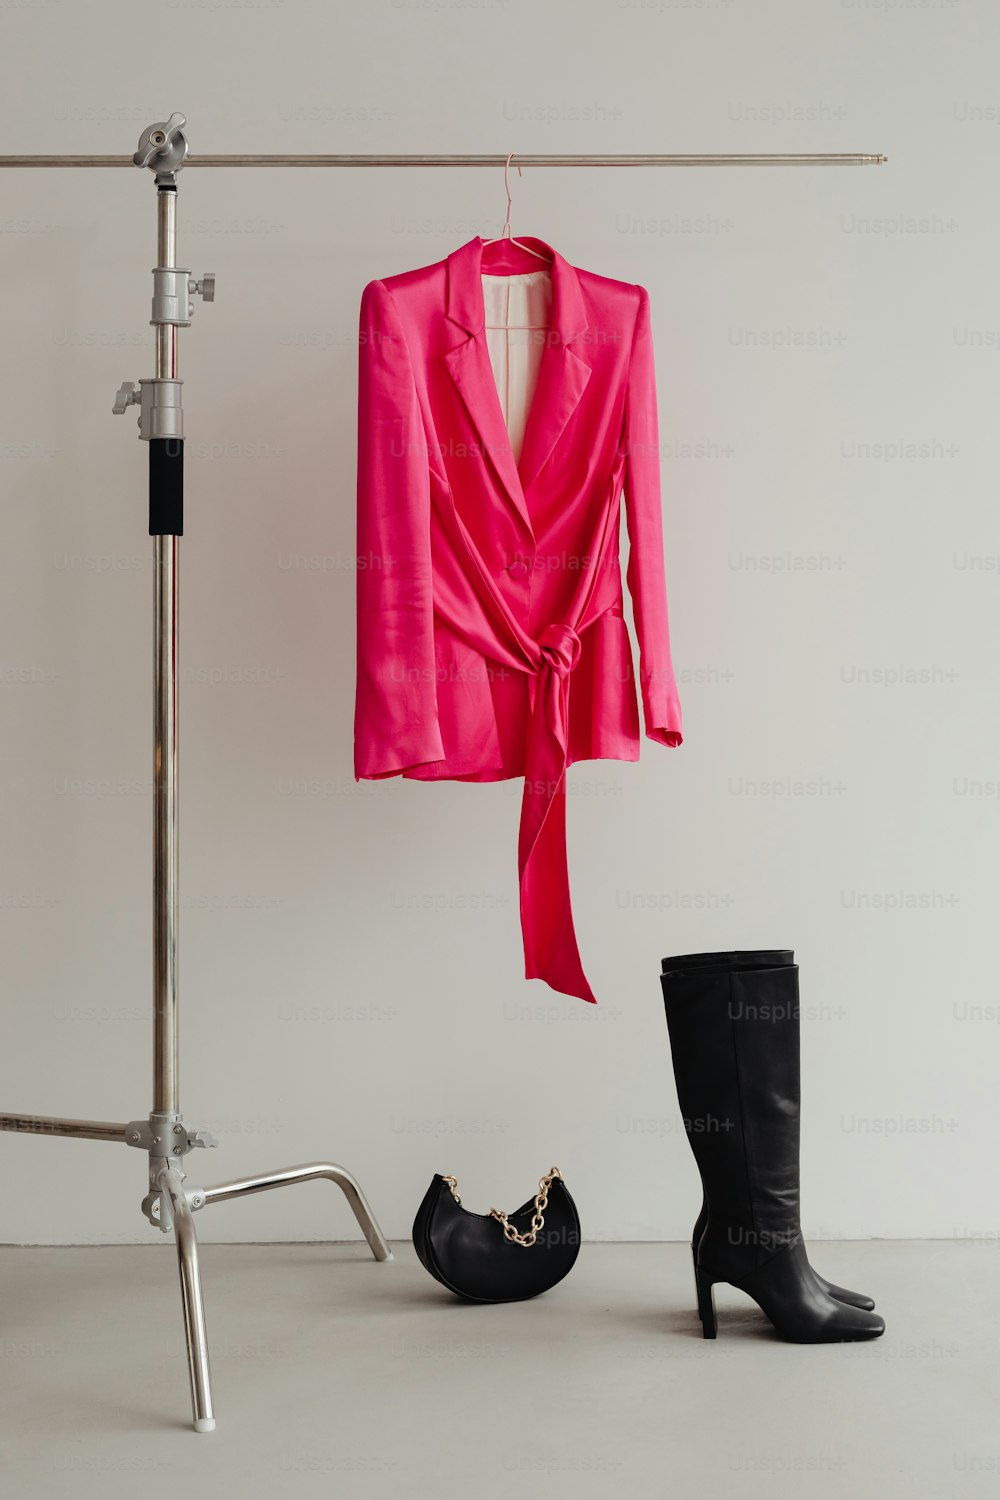 a pair of black boots and a pink jacket hanging on a clothes rack